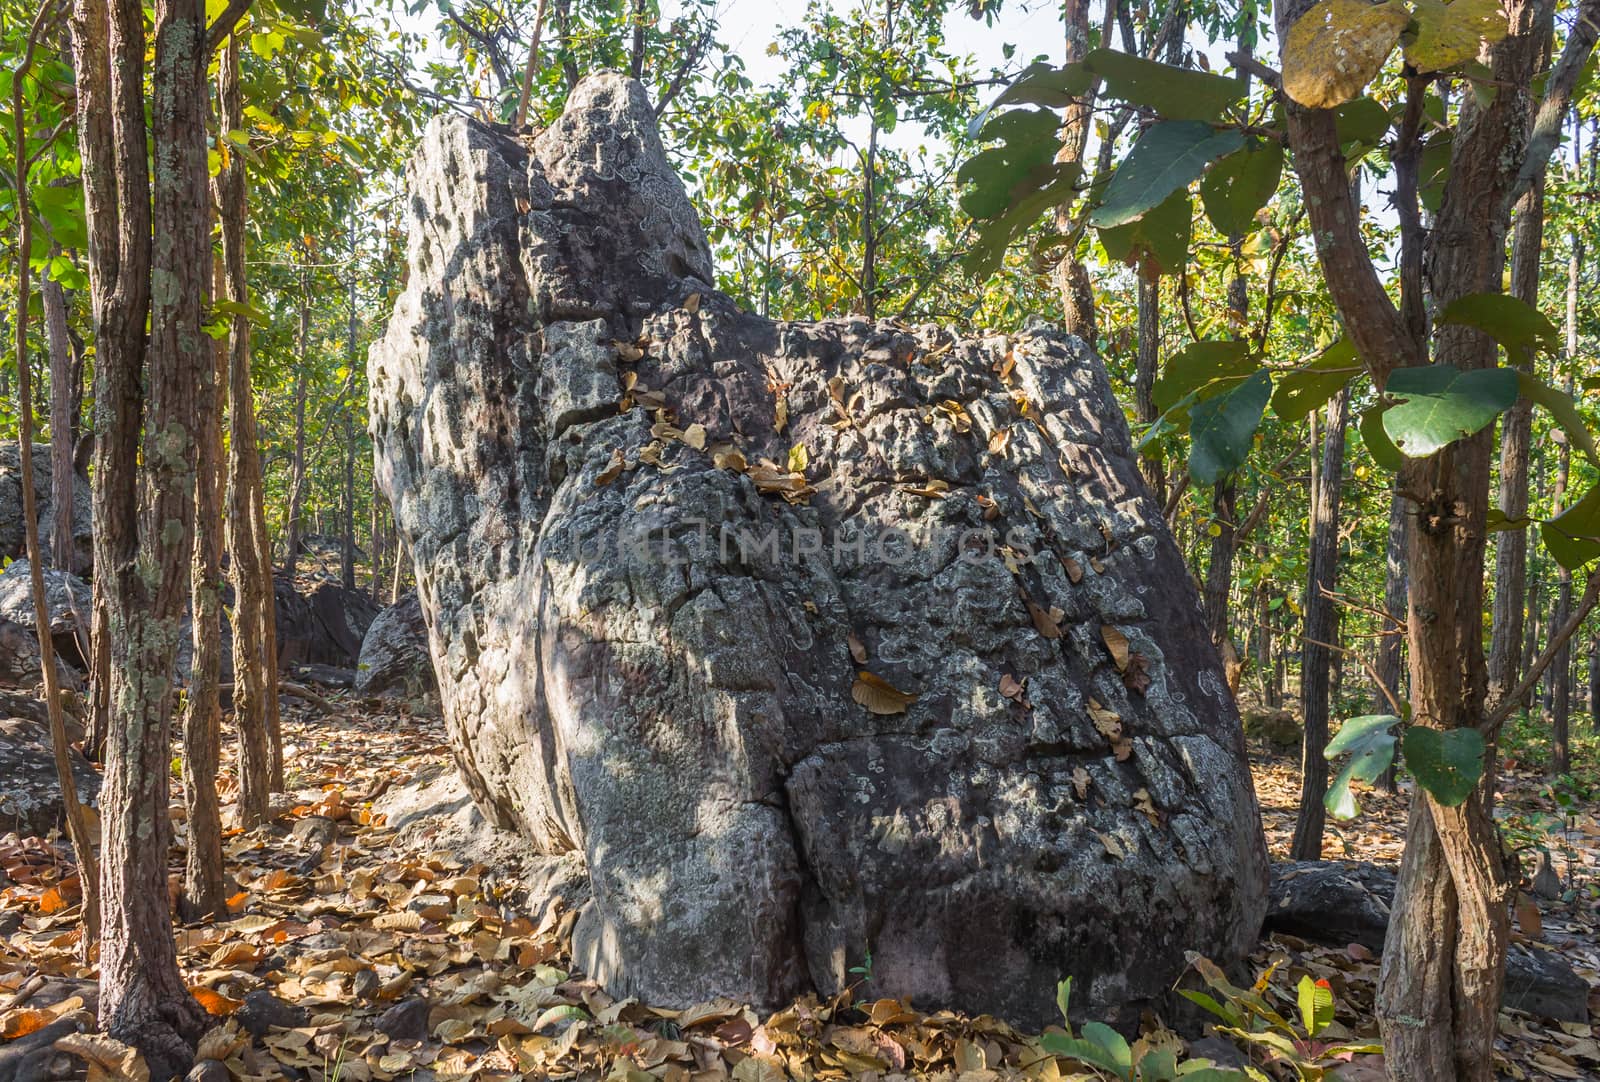 King Seat Stone or Rock at Phayao Attractions Northern Thailand  by steafpong